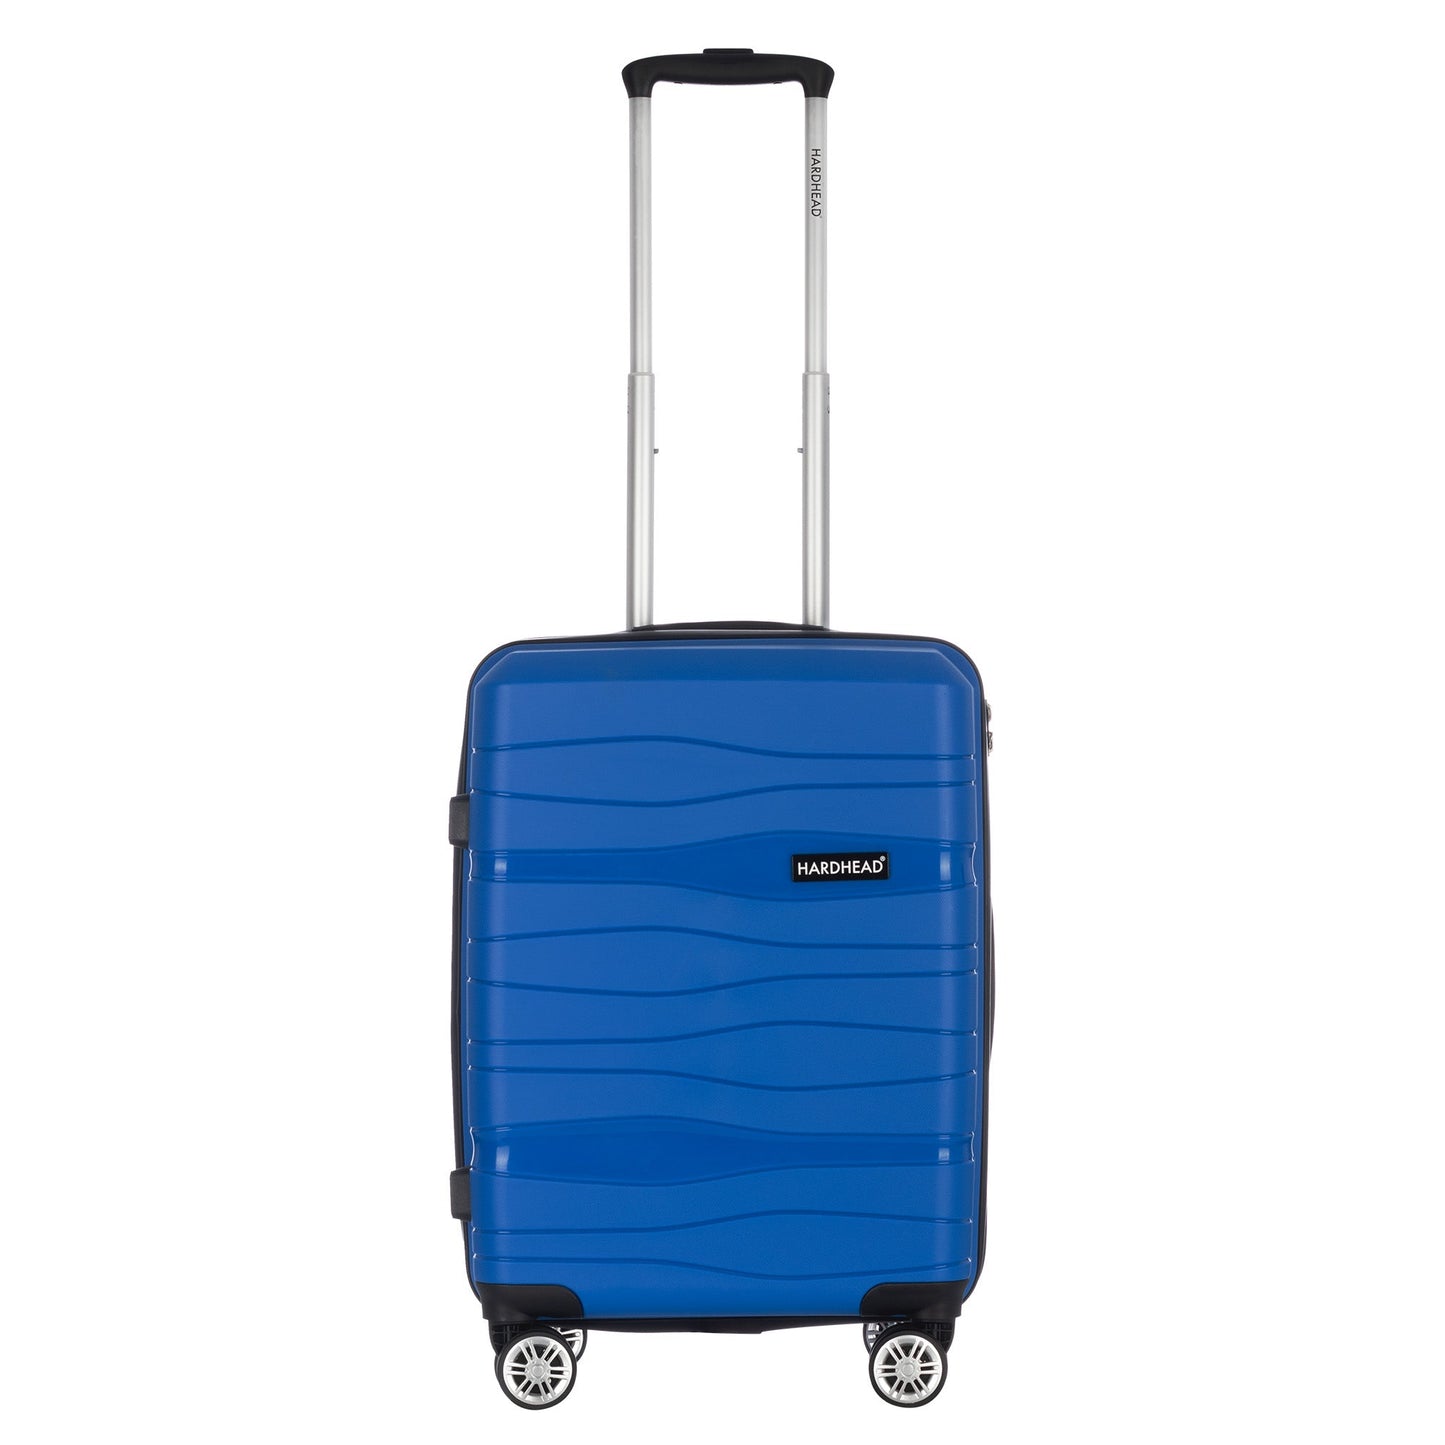 Polyprop Blue 3 pieces luggage set